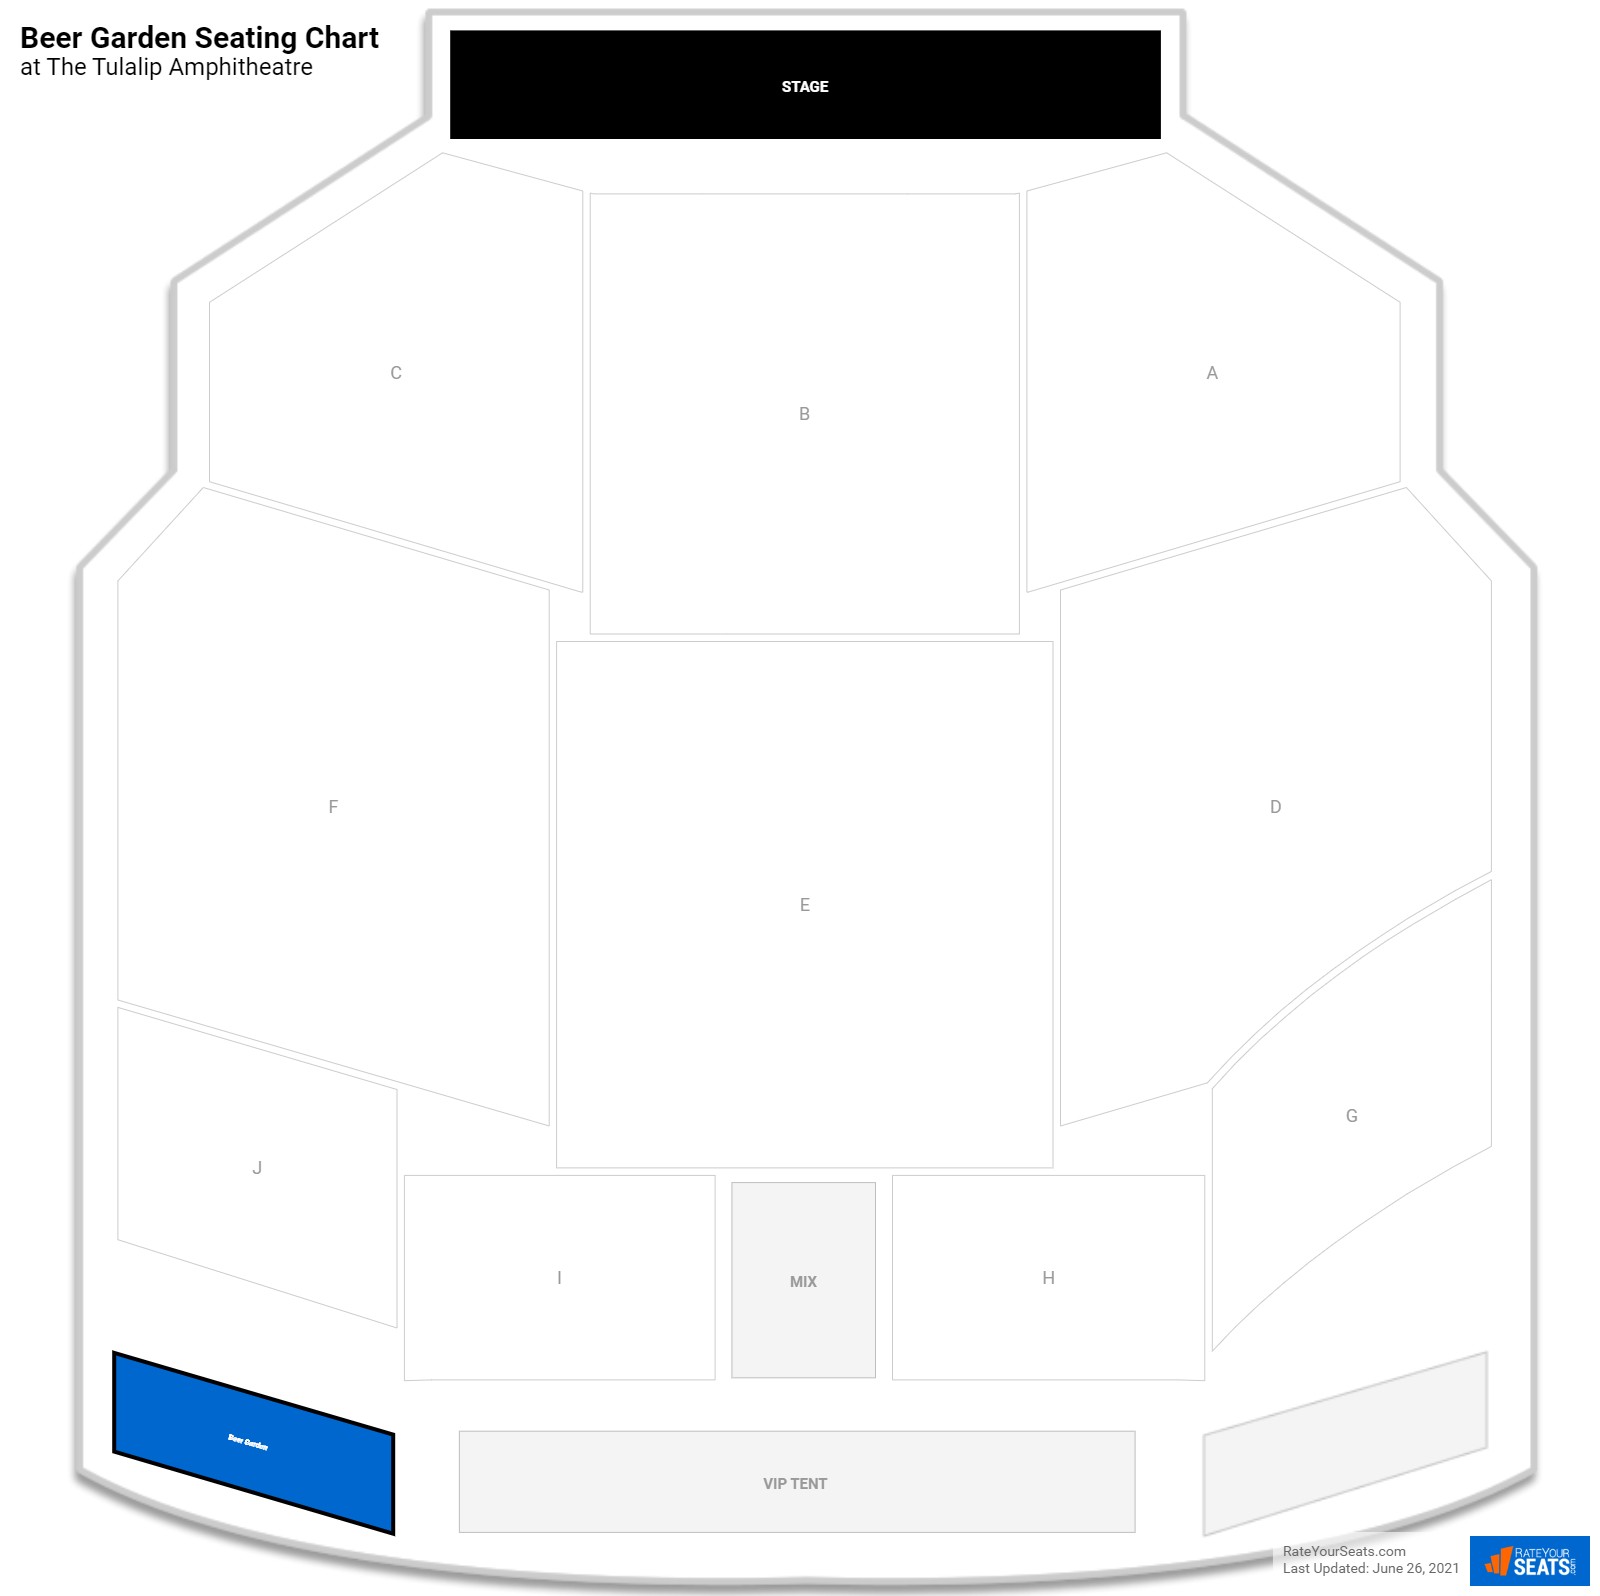 Concert Beer Garden Seating Chart at Tulalip Amphitheatre